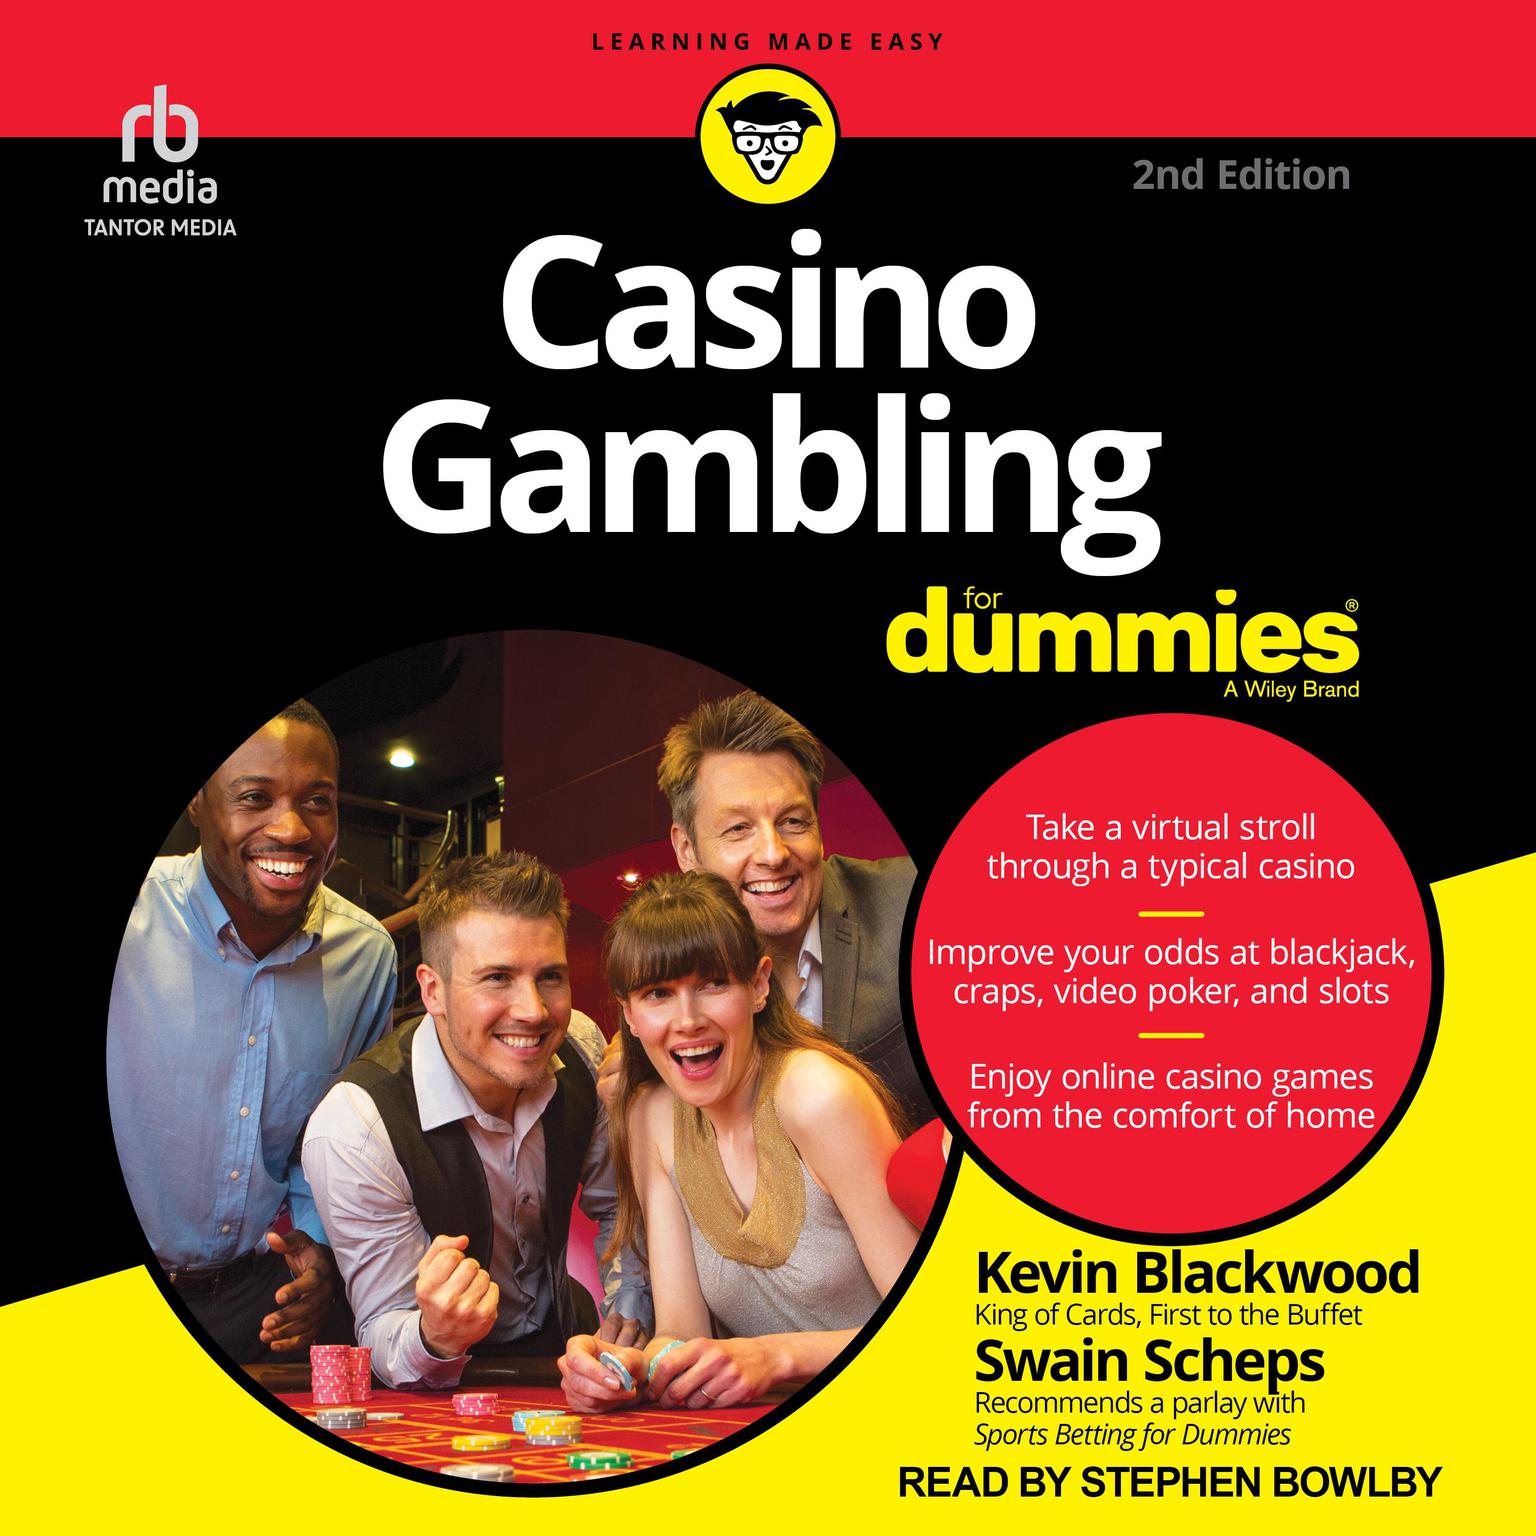 Casino Gambling For Dummies, 2nd Edition Audiobook, by Swain Scheps